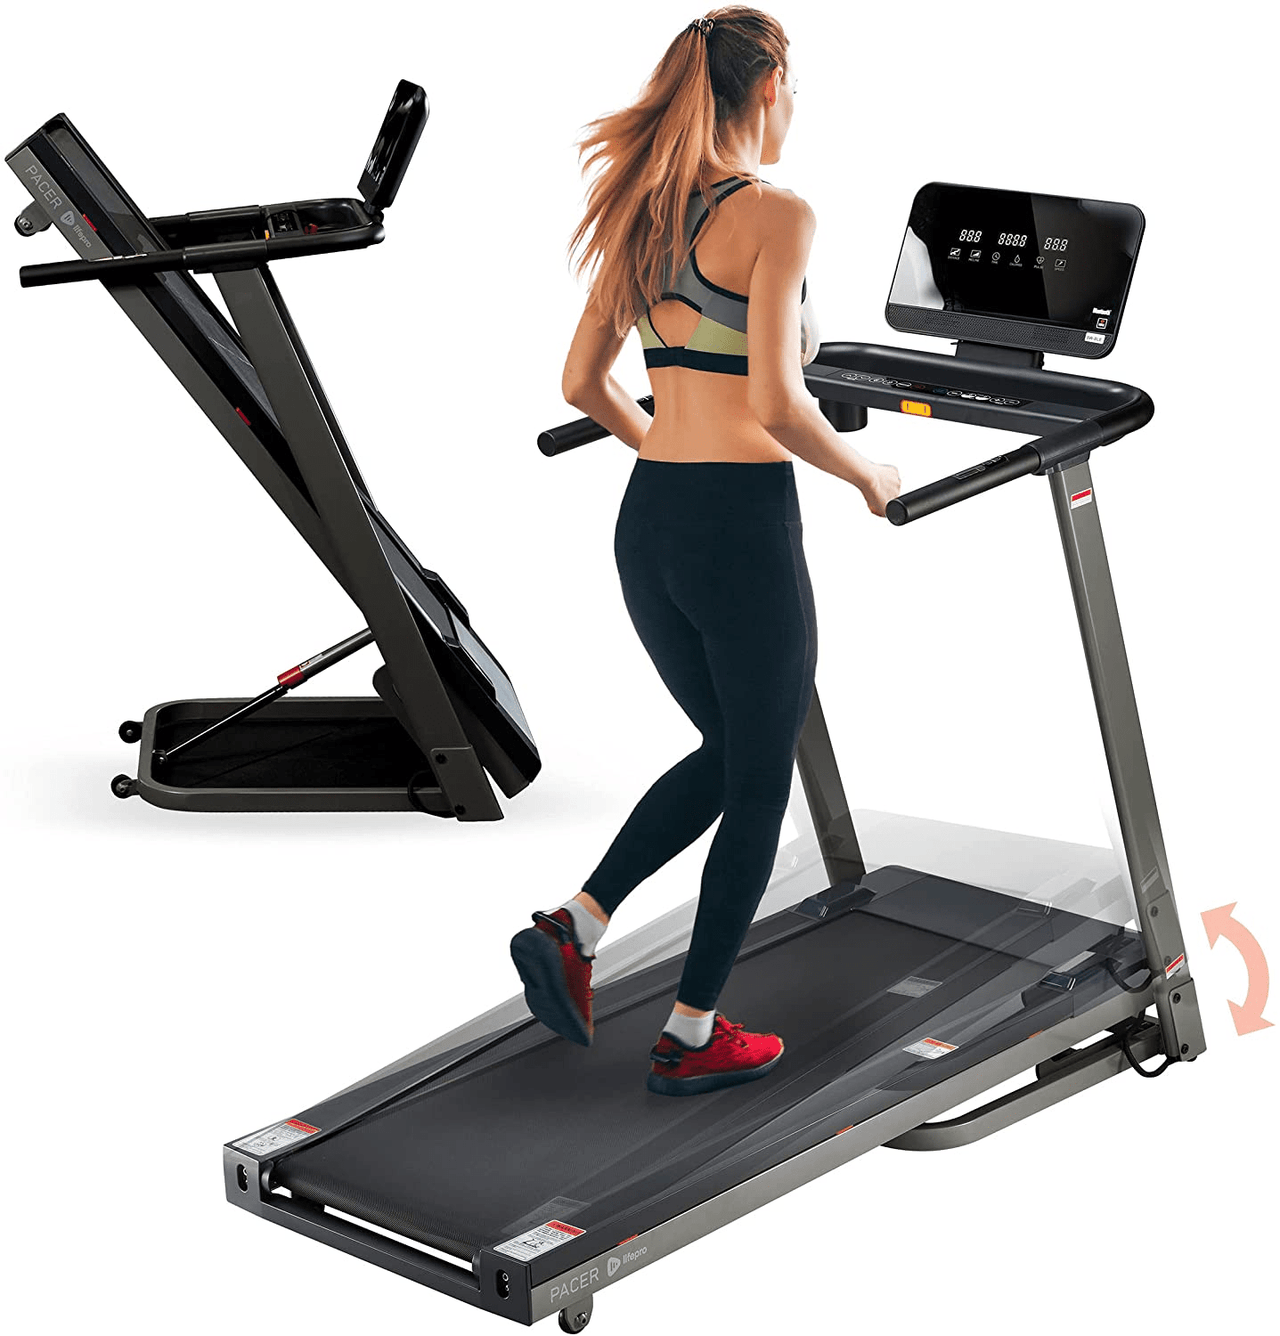 model running on treadmill, with photo inset of it folding up